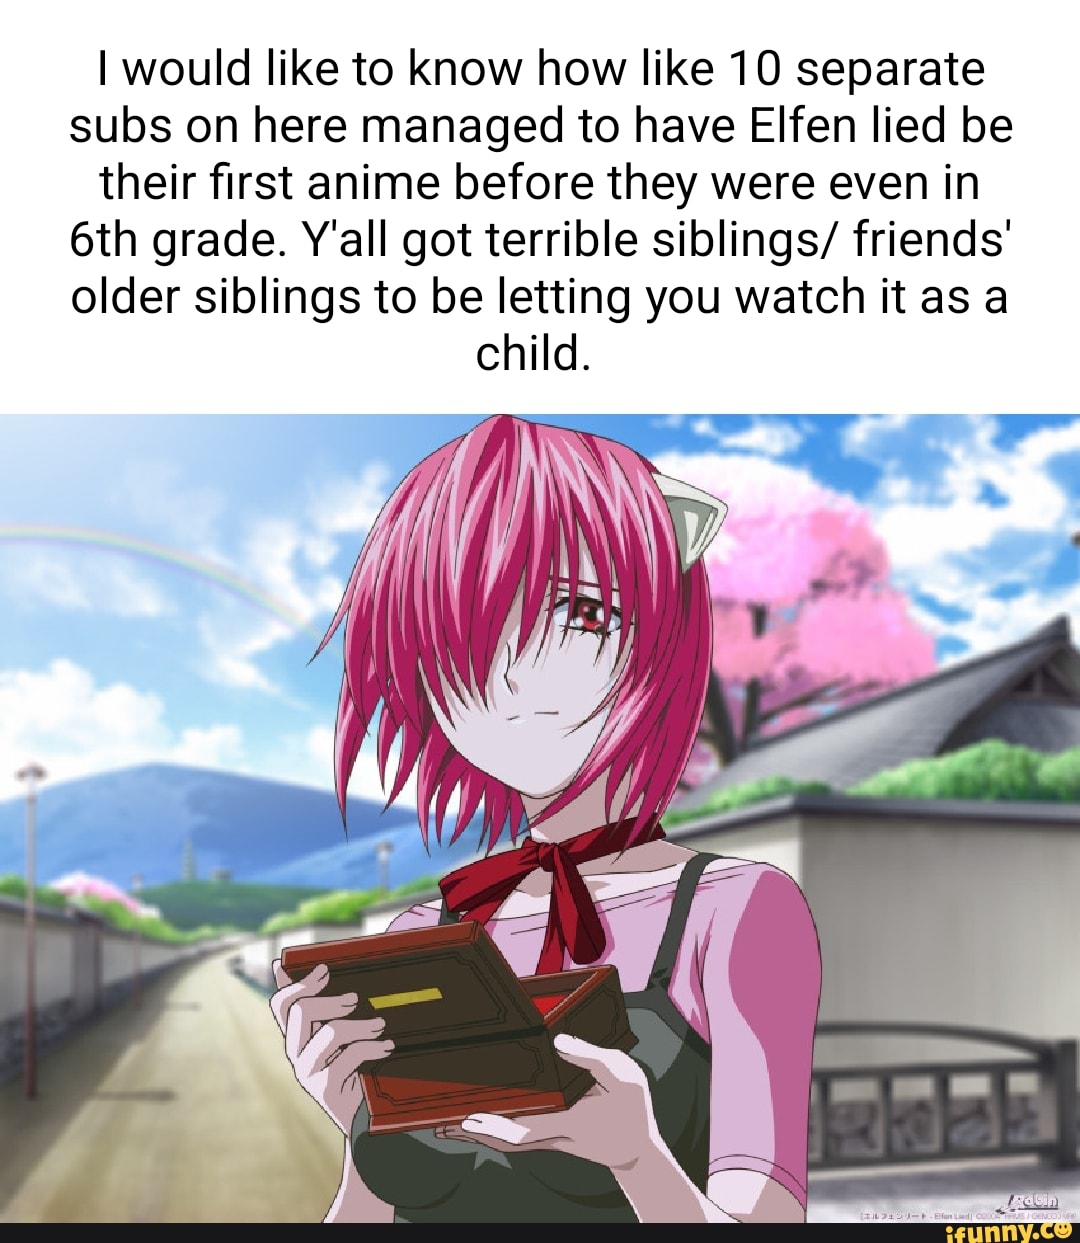 So my squeamish friend watched a episode of Elfen Lied with me